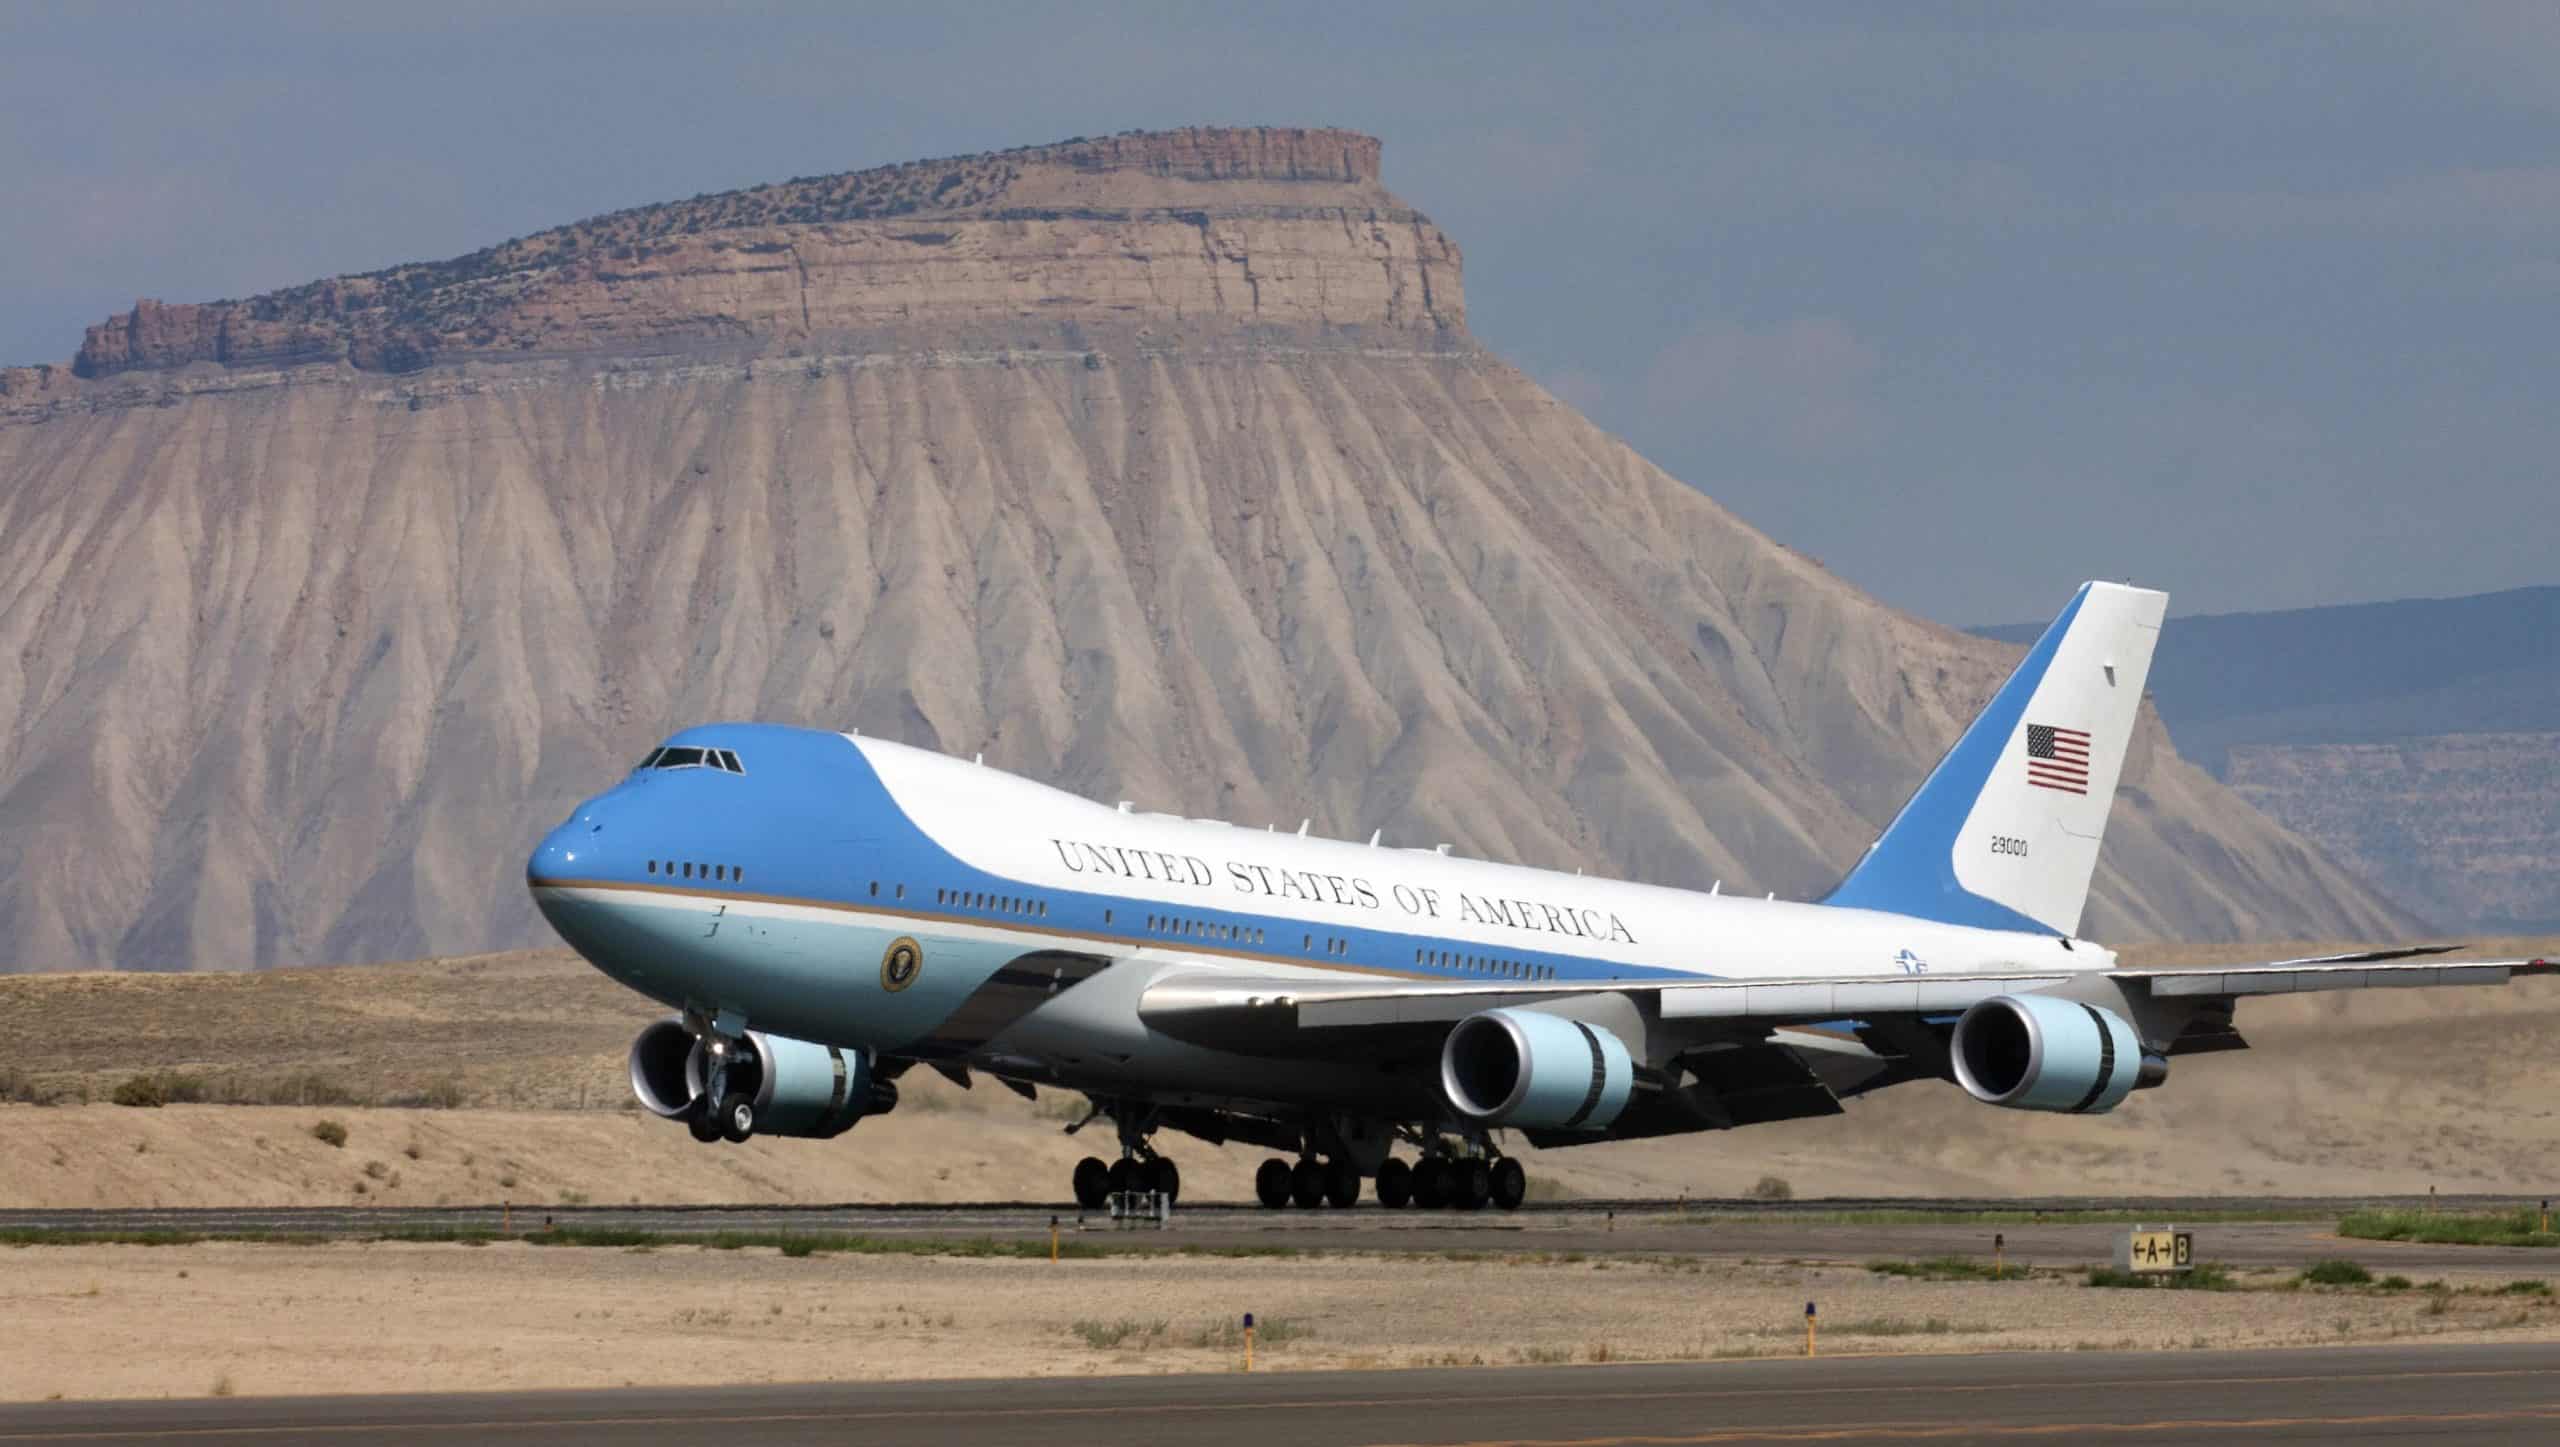 Monitoring Air Force One